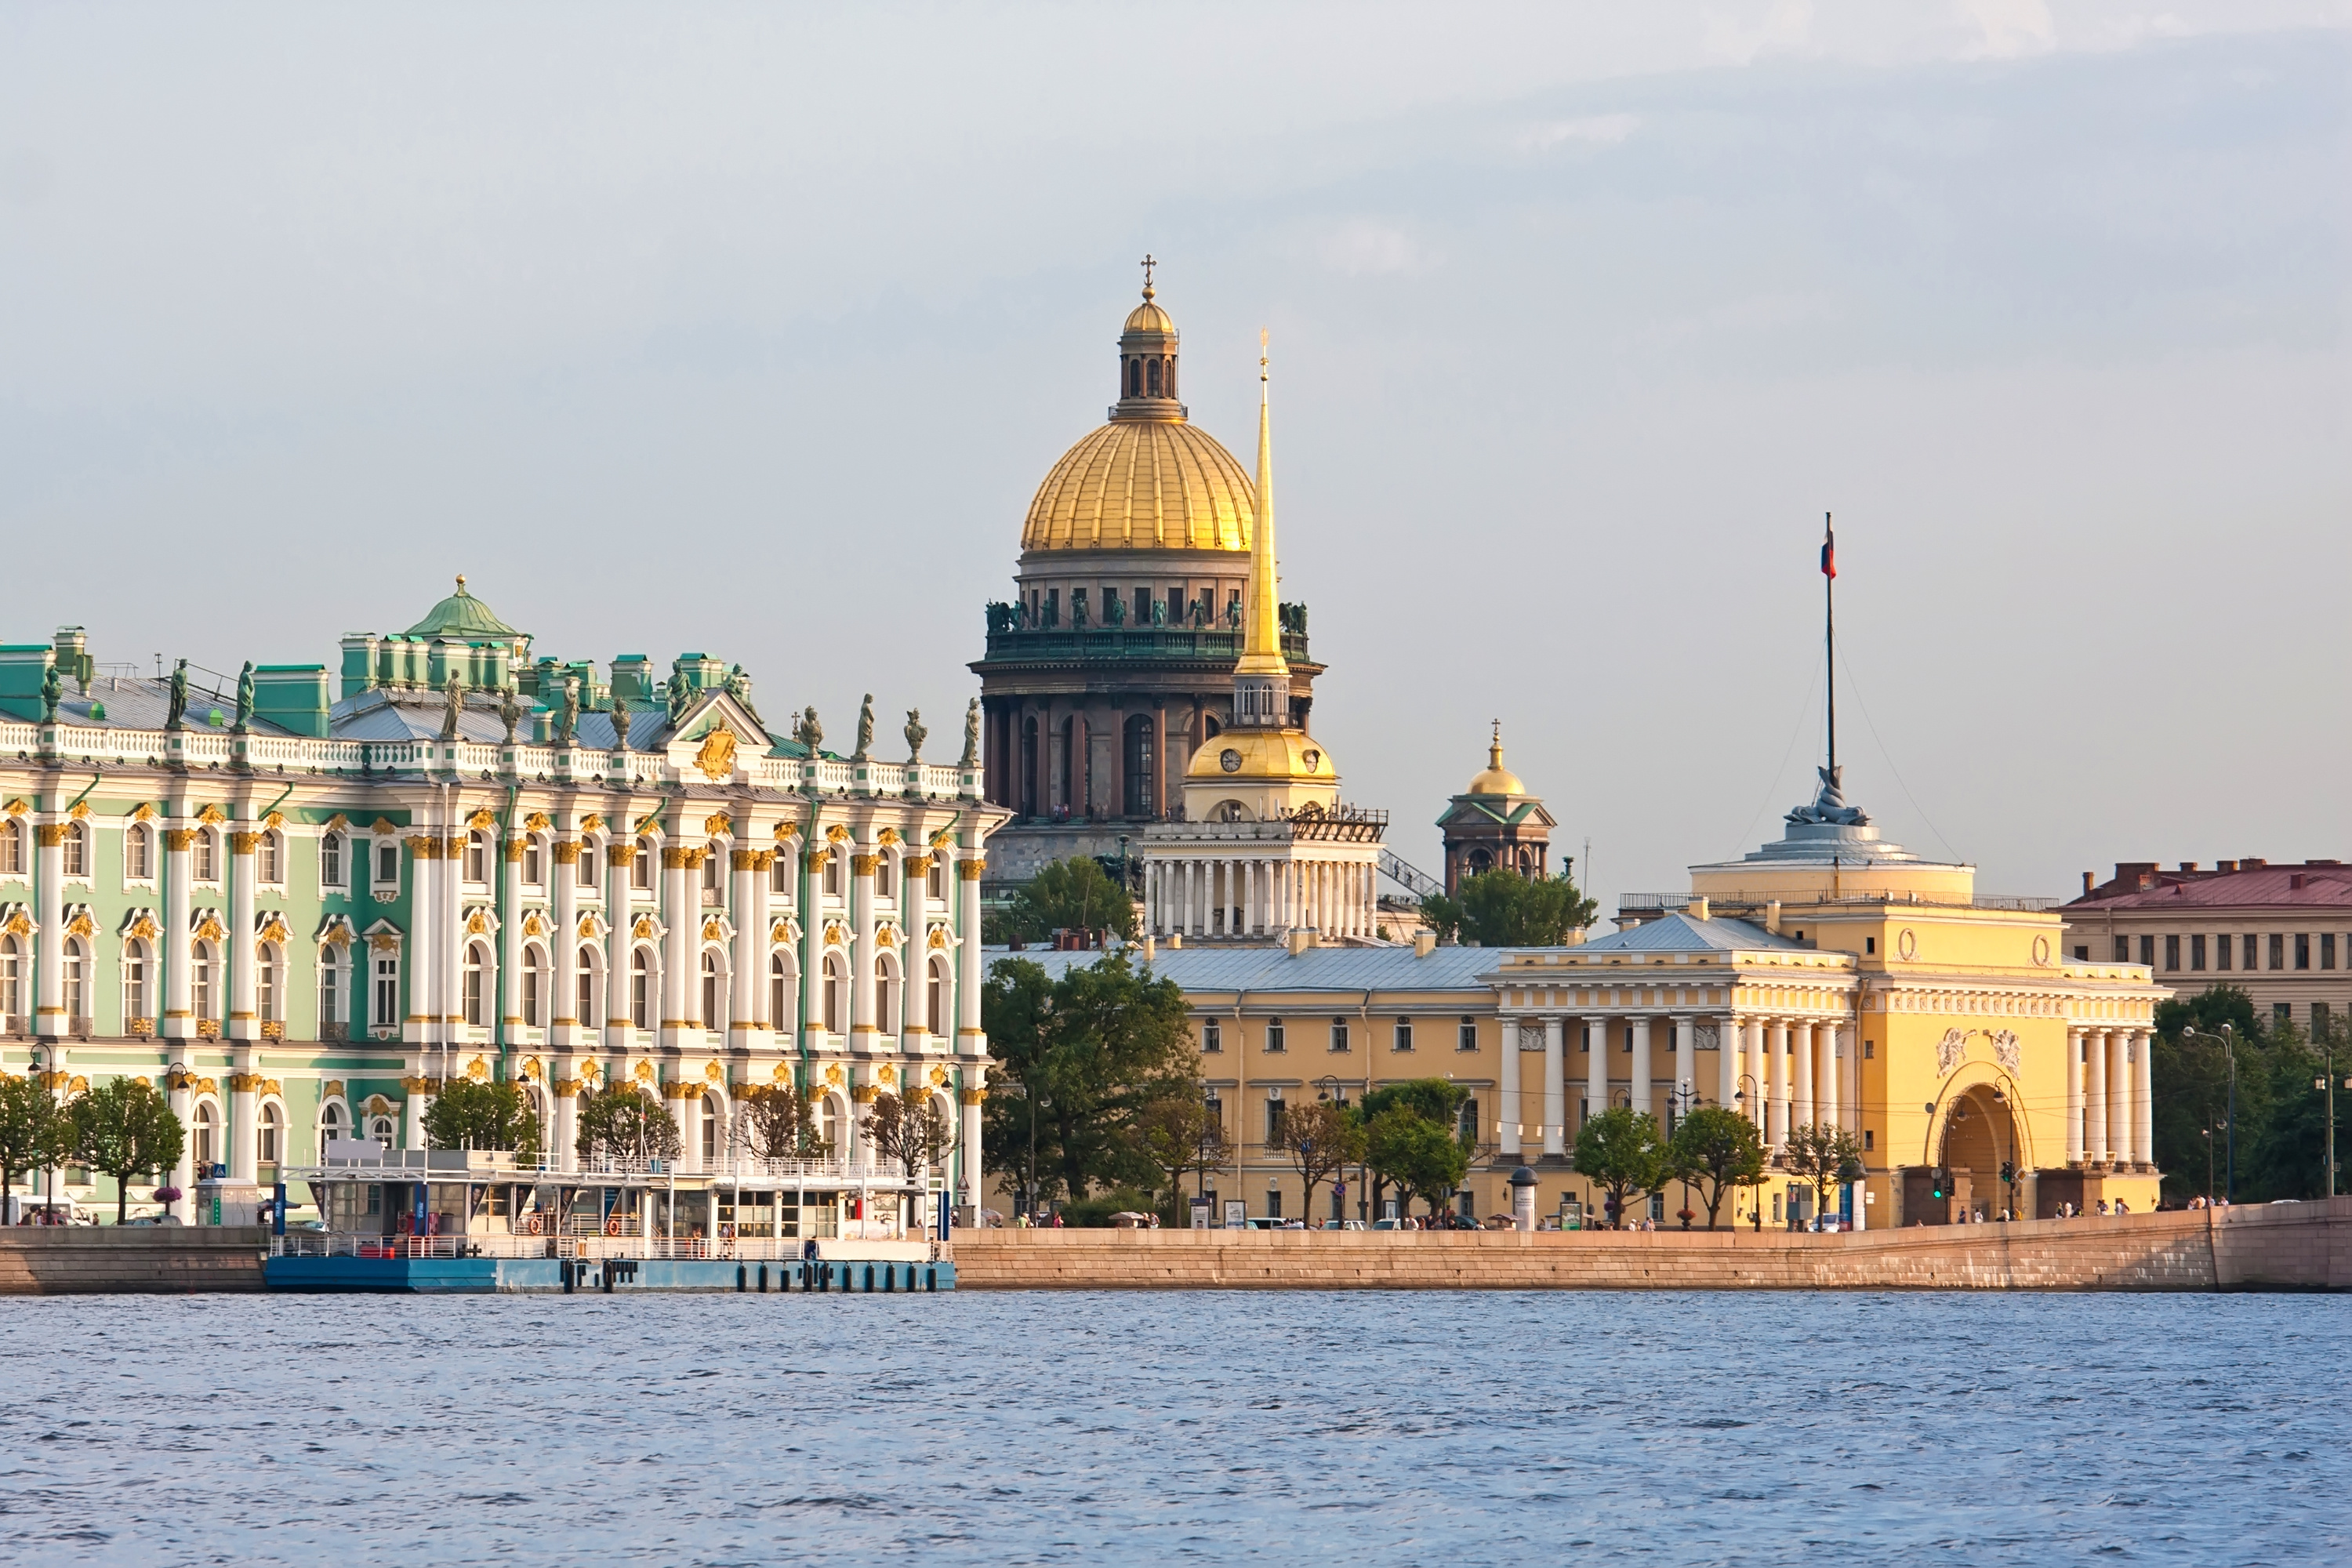 Winter Palace and Hermitage Museum, St. Isaac's Cathedral, and Admiralty building along Neva River